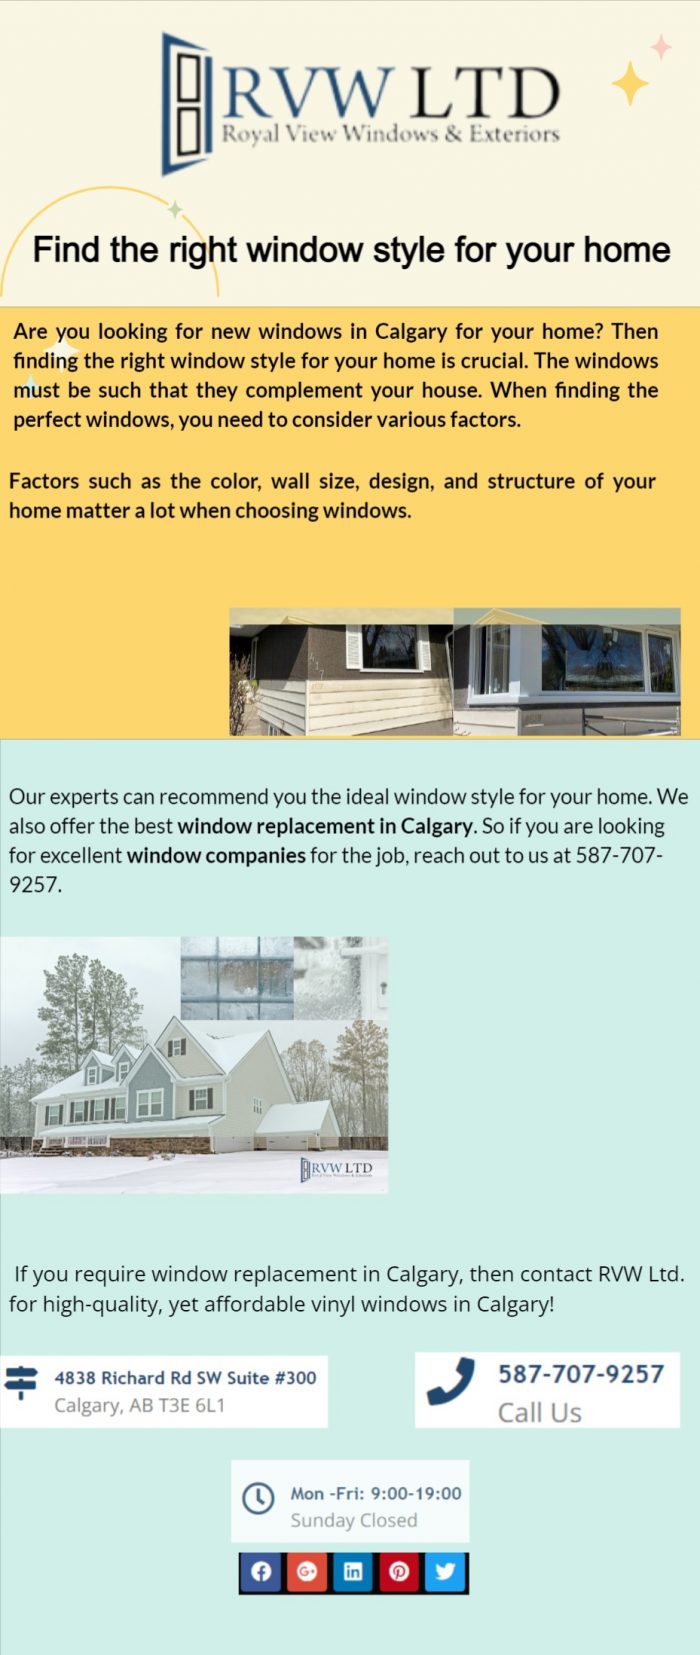 Find the right window style for your home